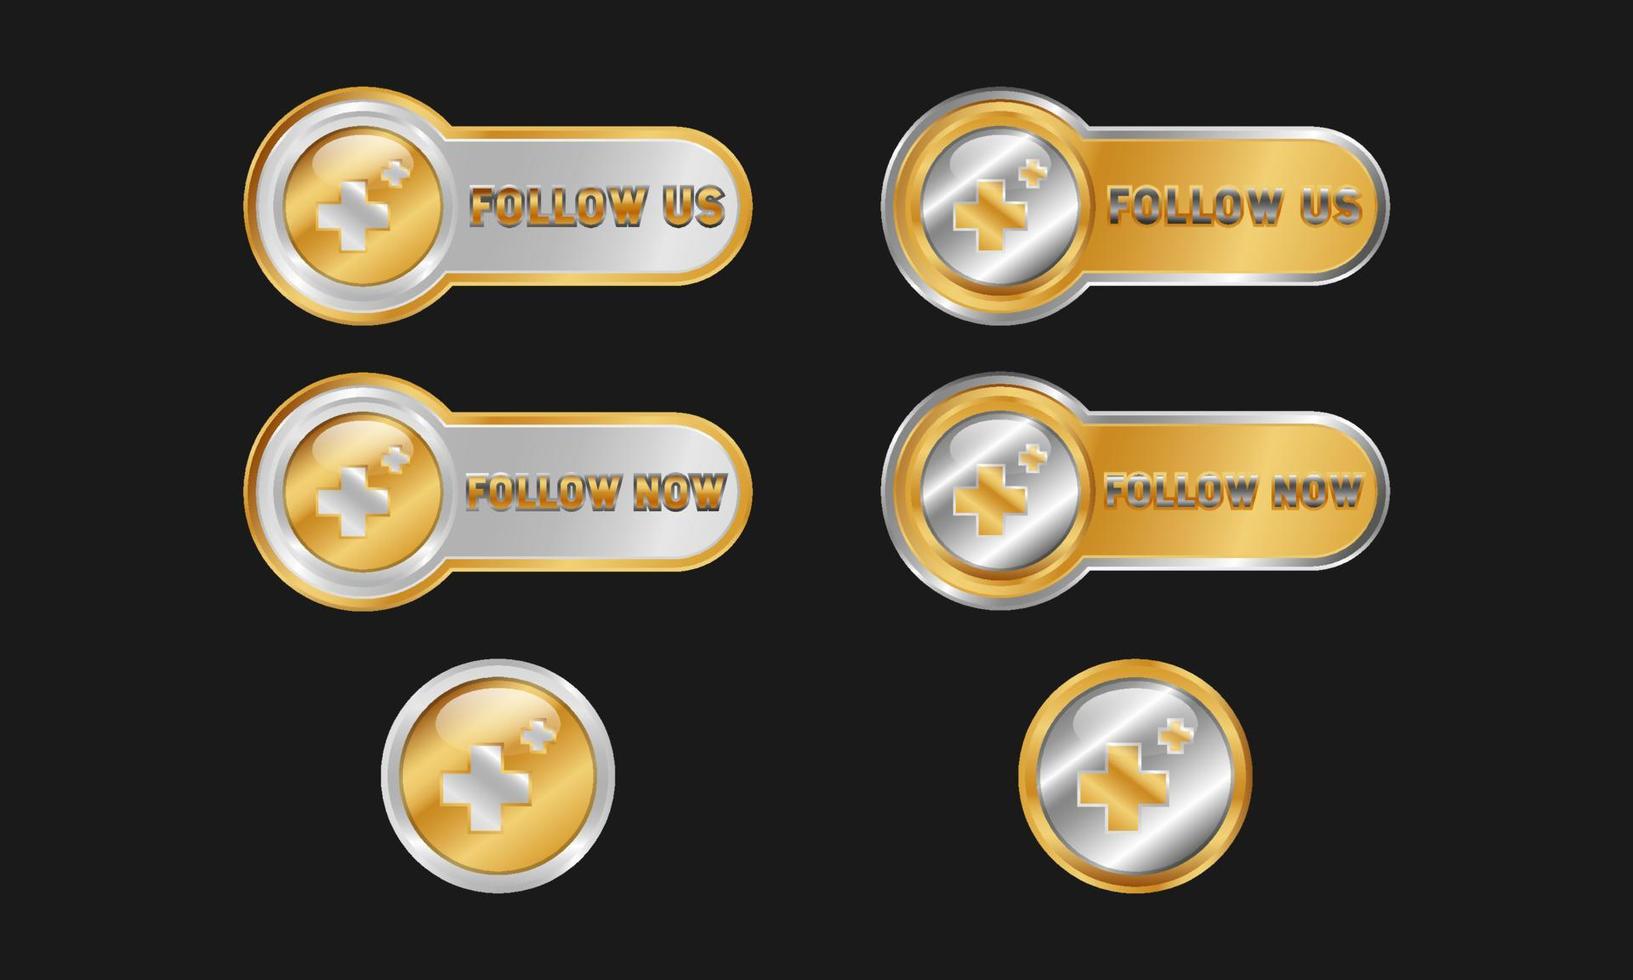 Follow Gold Button. Follow us with a glossy effect symbol. Premium and luxury icon template vector